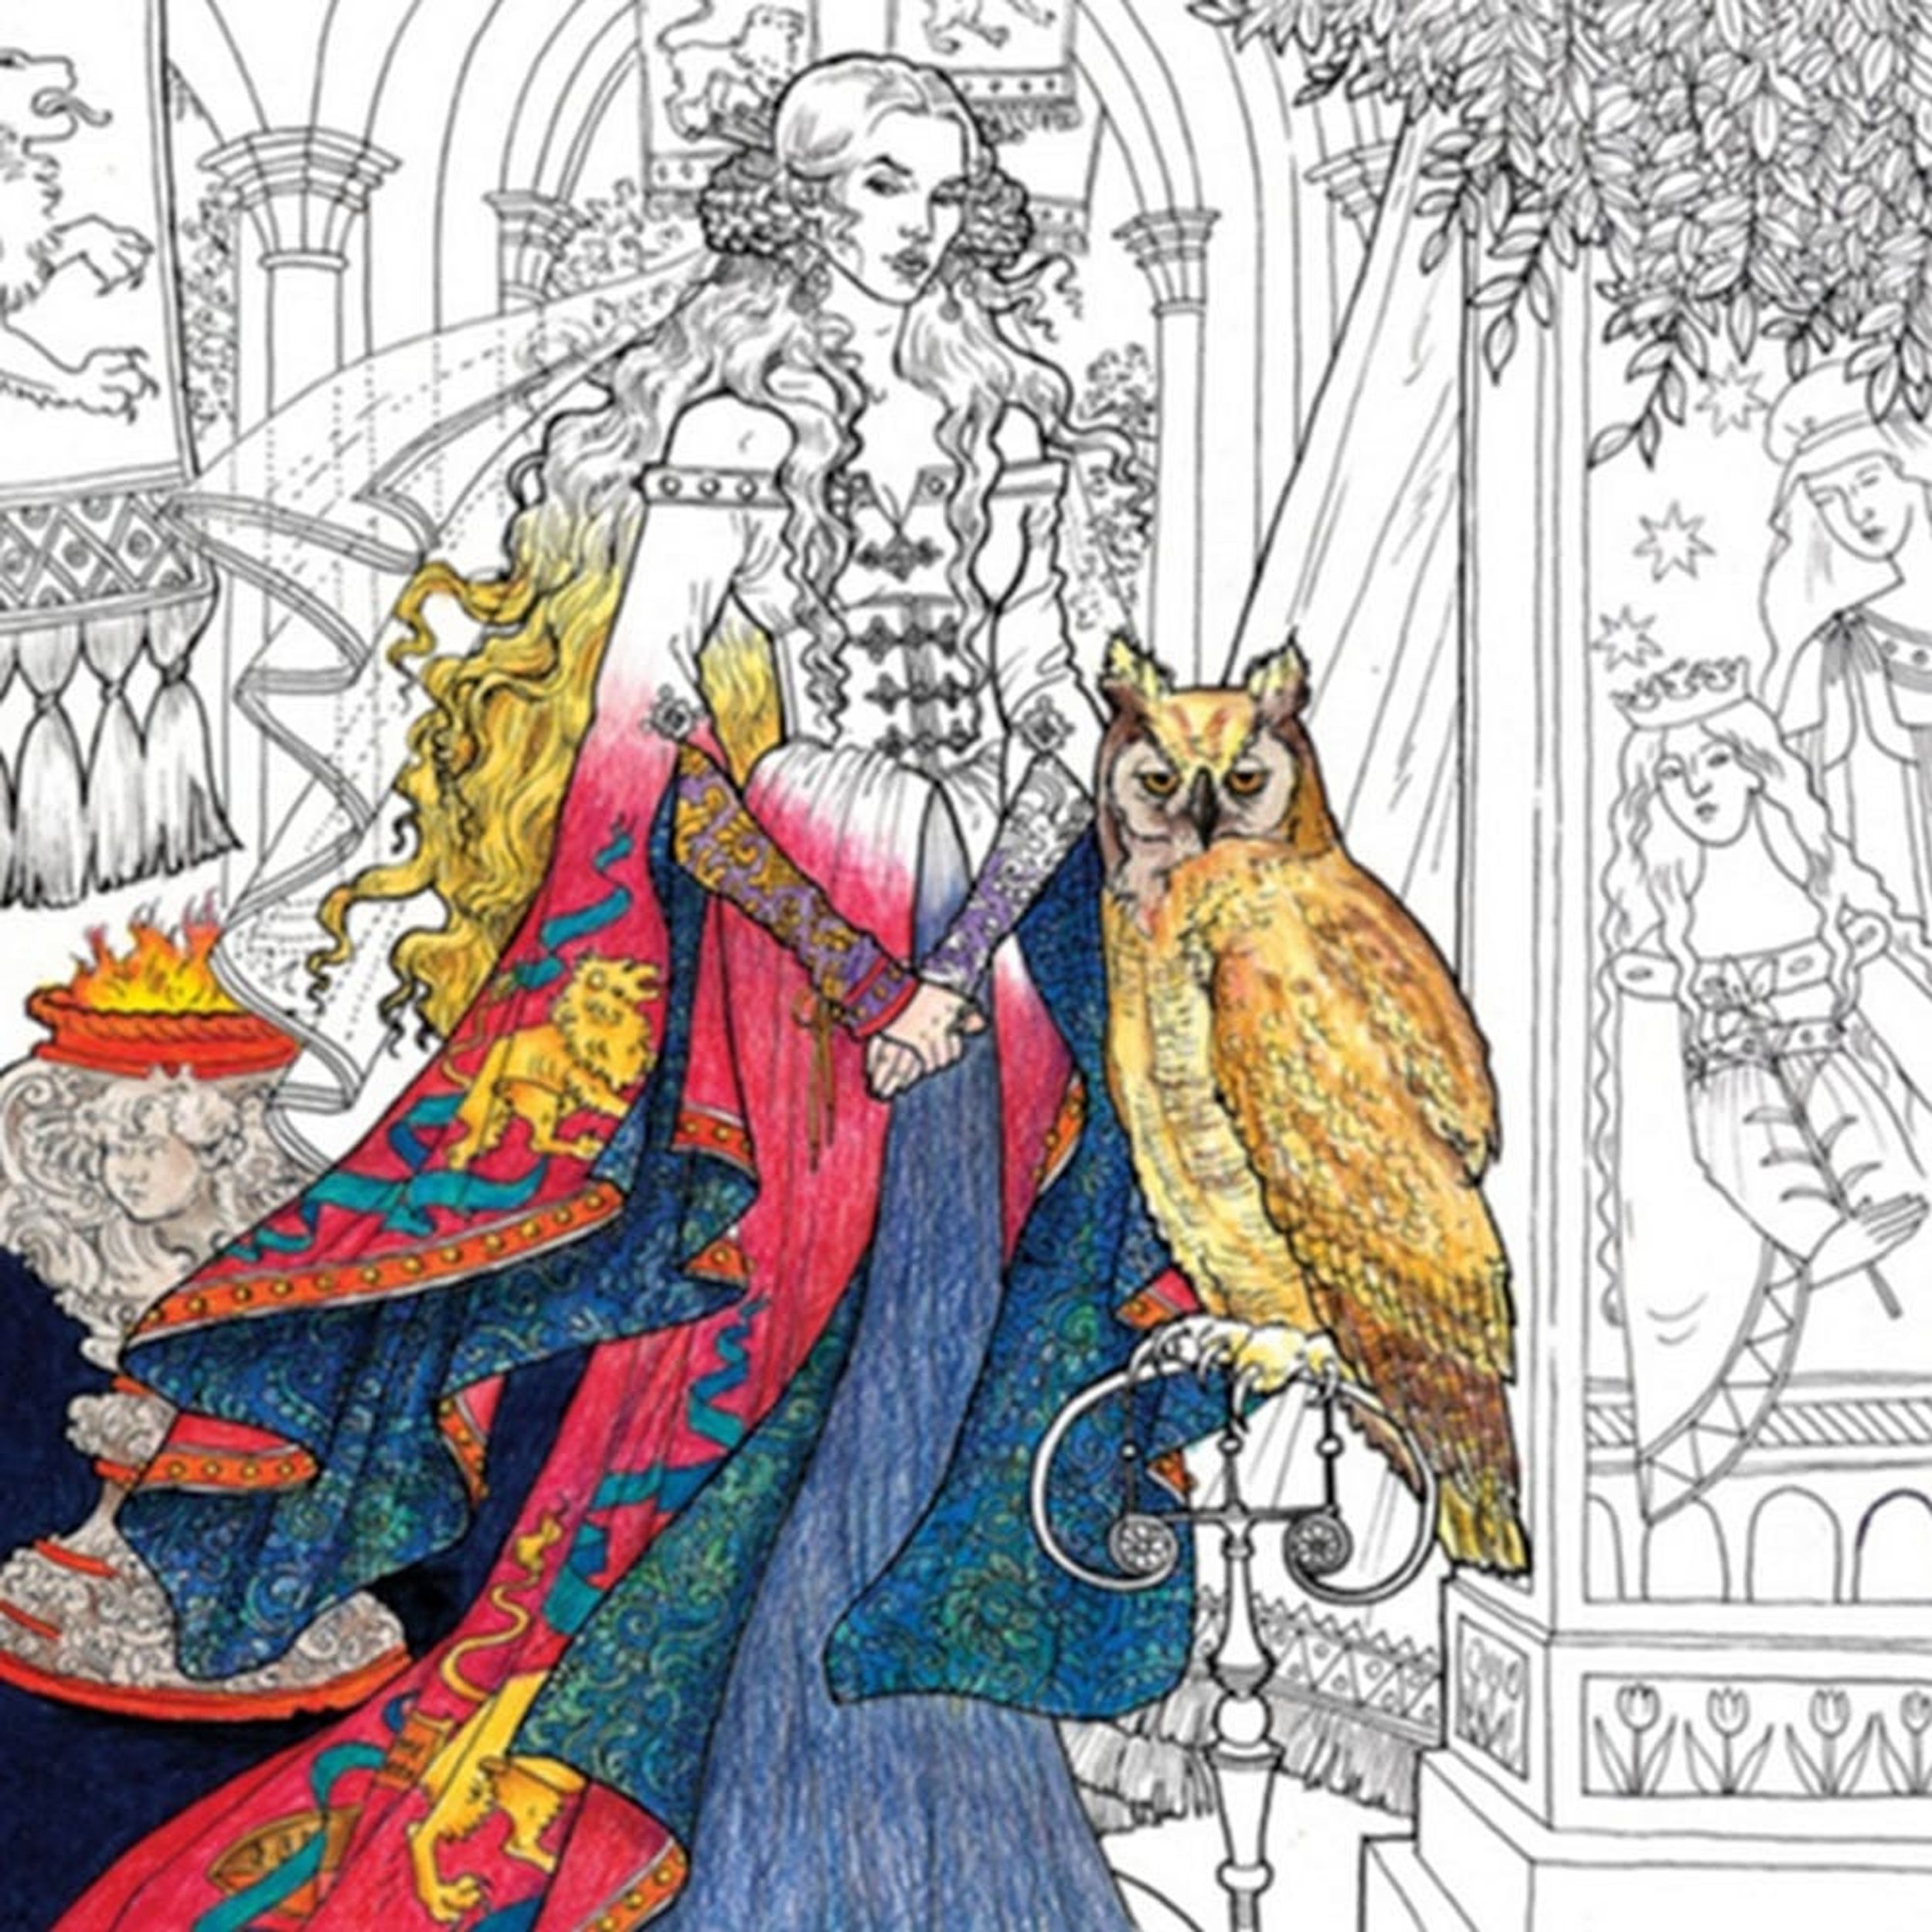 See a Sneak Peek of the Game of Thrones Coloring Book